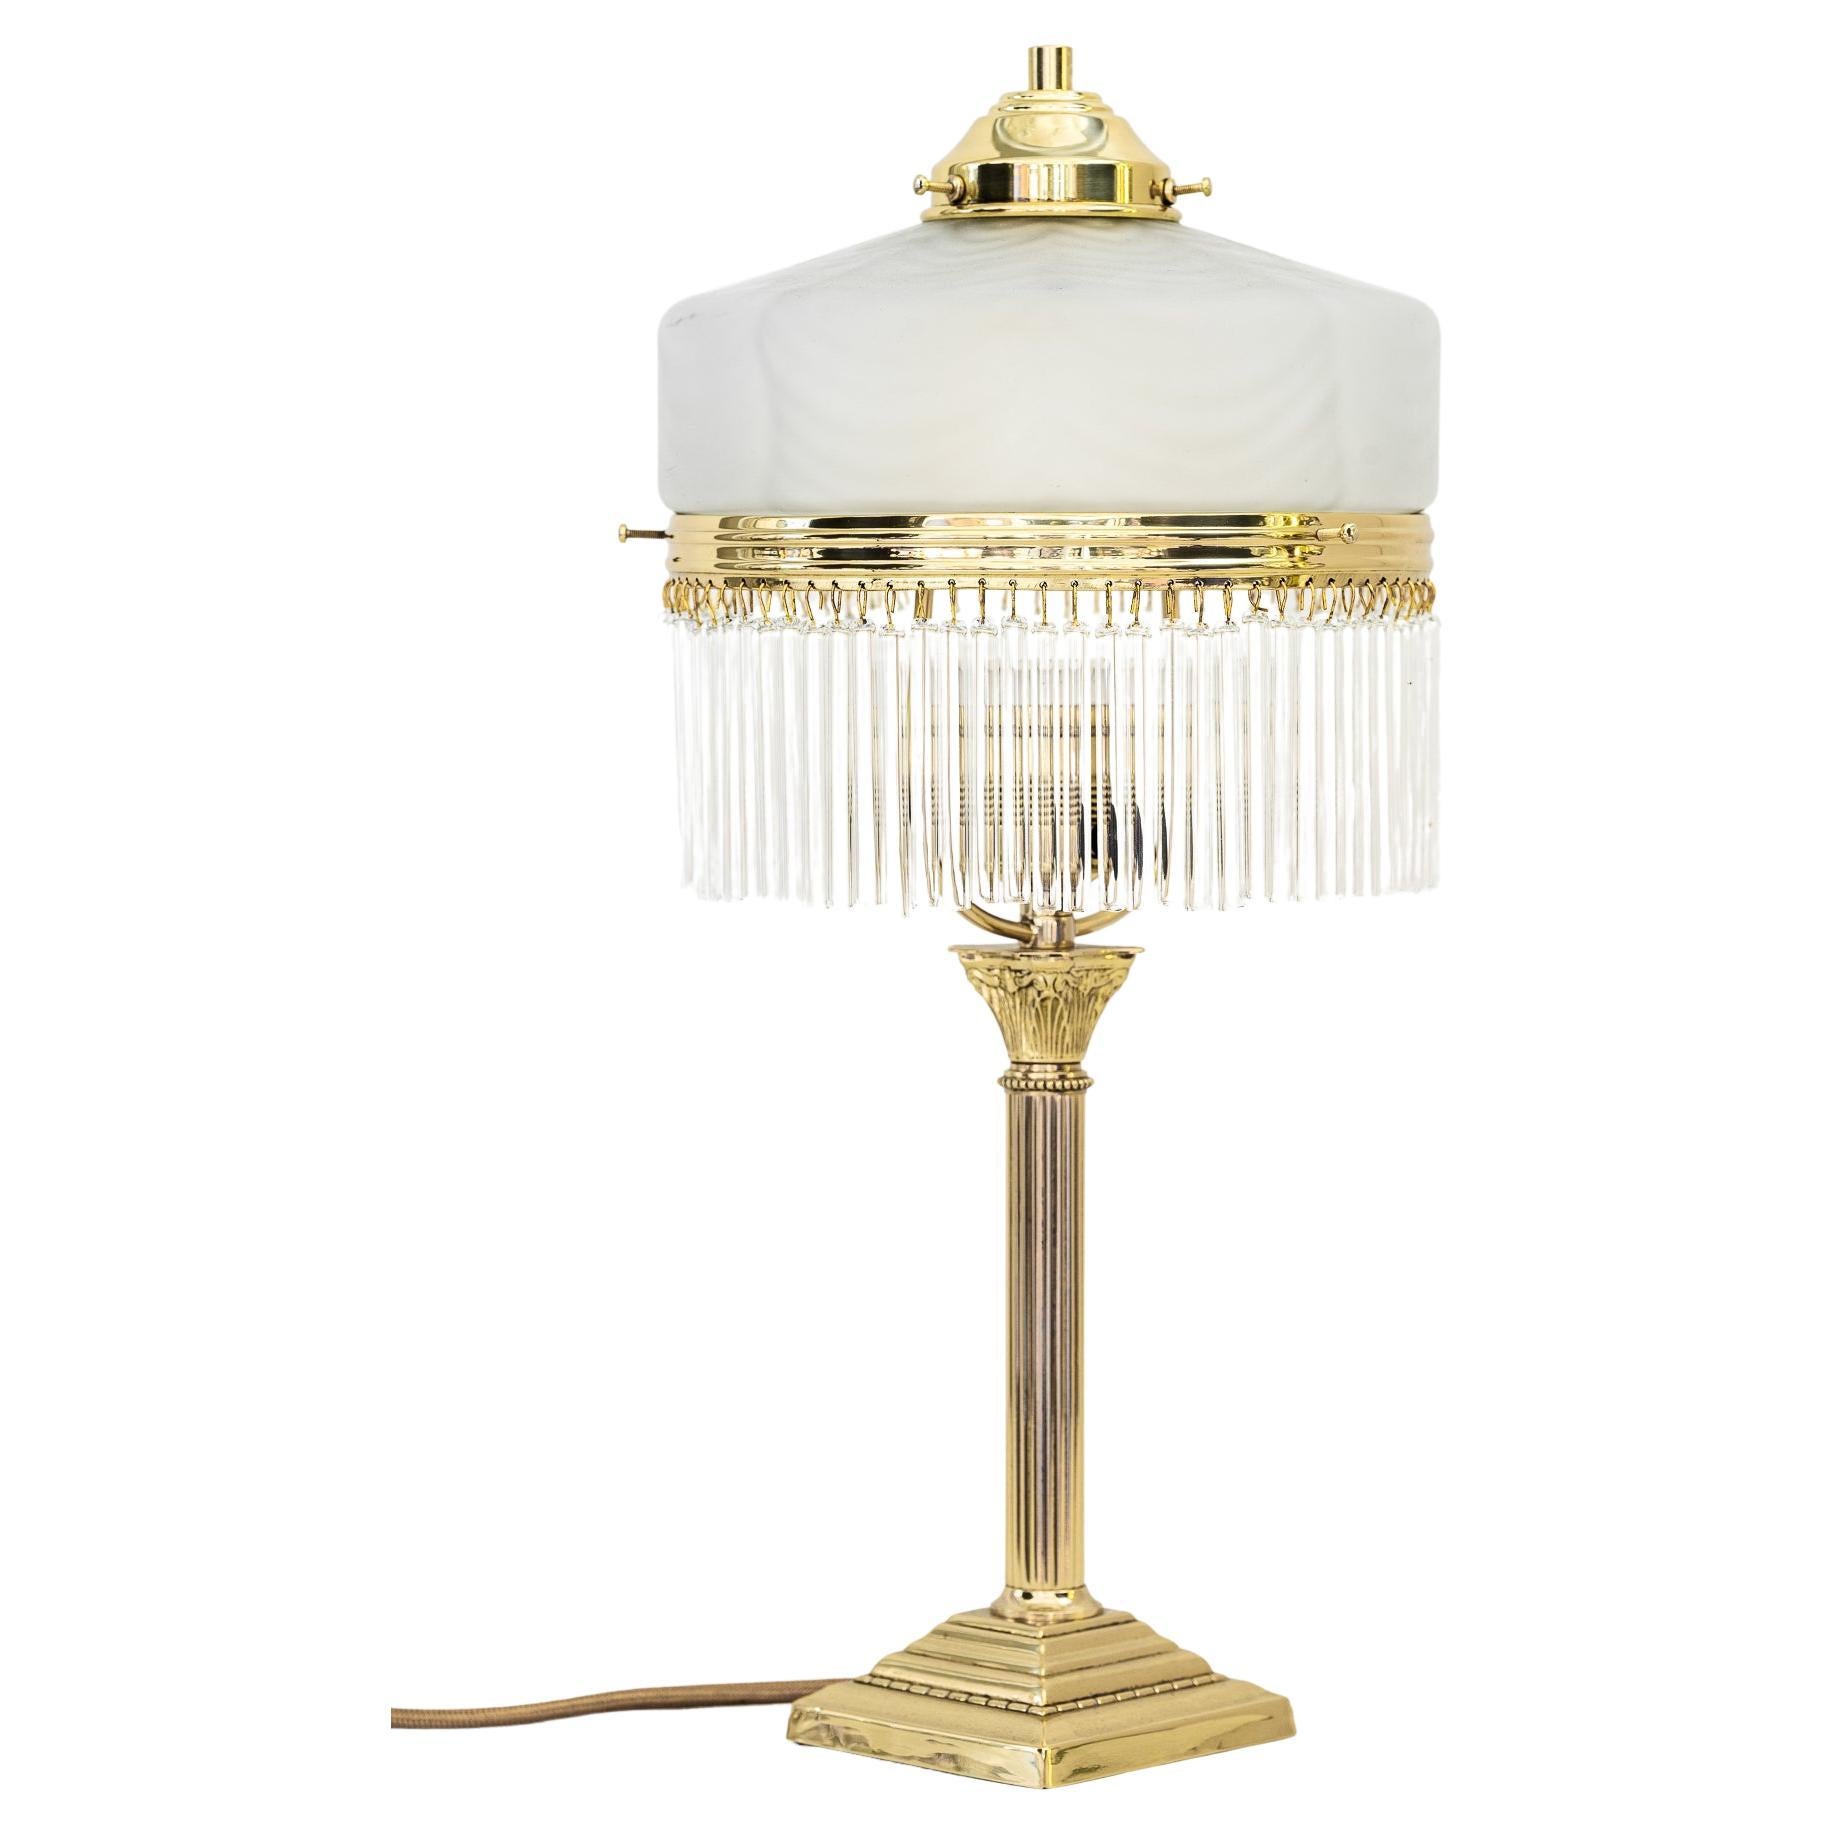 Art Deco Table Lamp with Original Glass Shade Around 1920s